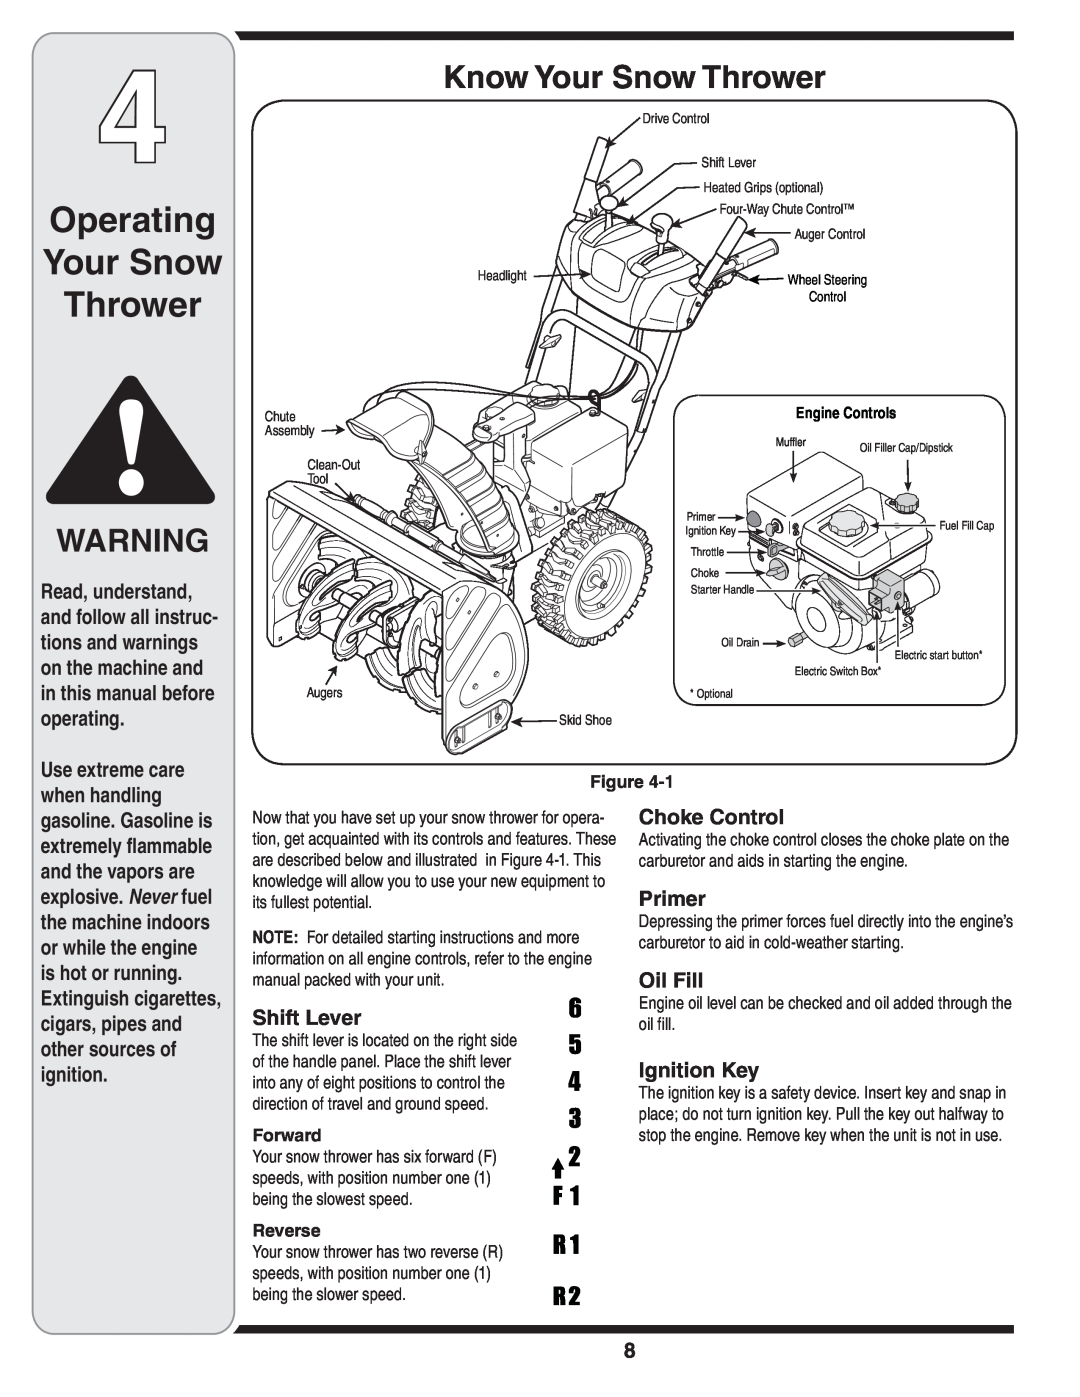 MTD 769-04210 Operating Your Snow Thrower, Know Your Snow Thrower, Shift Lever, Choke Control, Primer, Oil Fill, Forward 